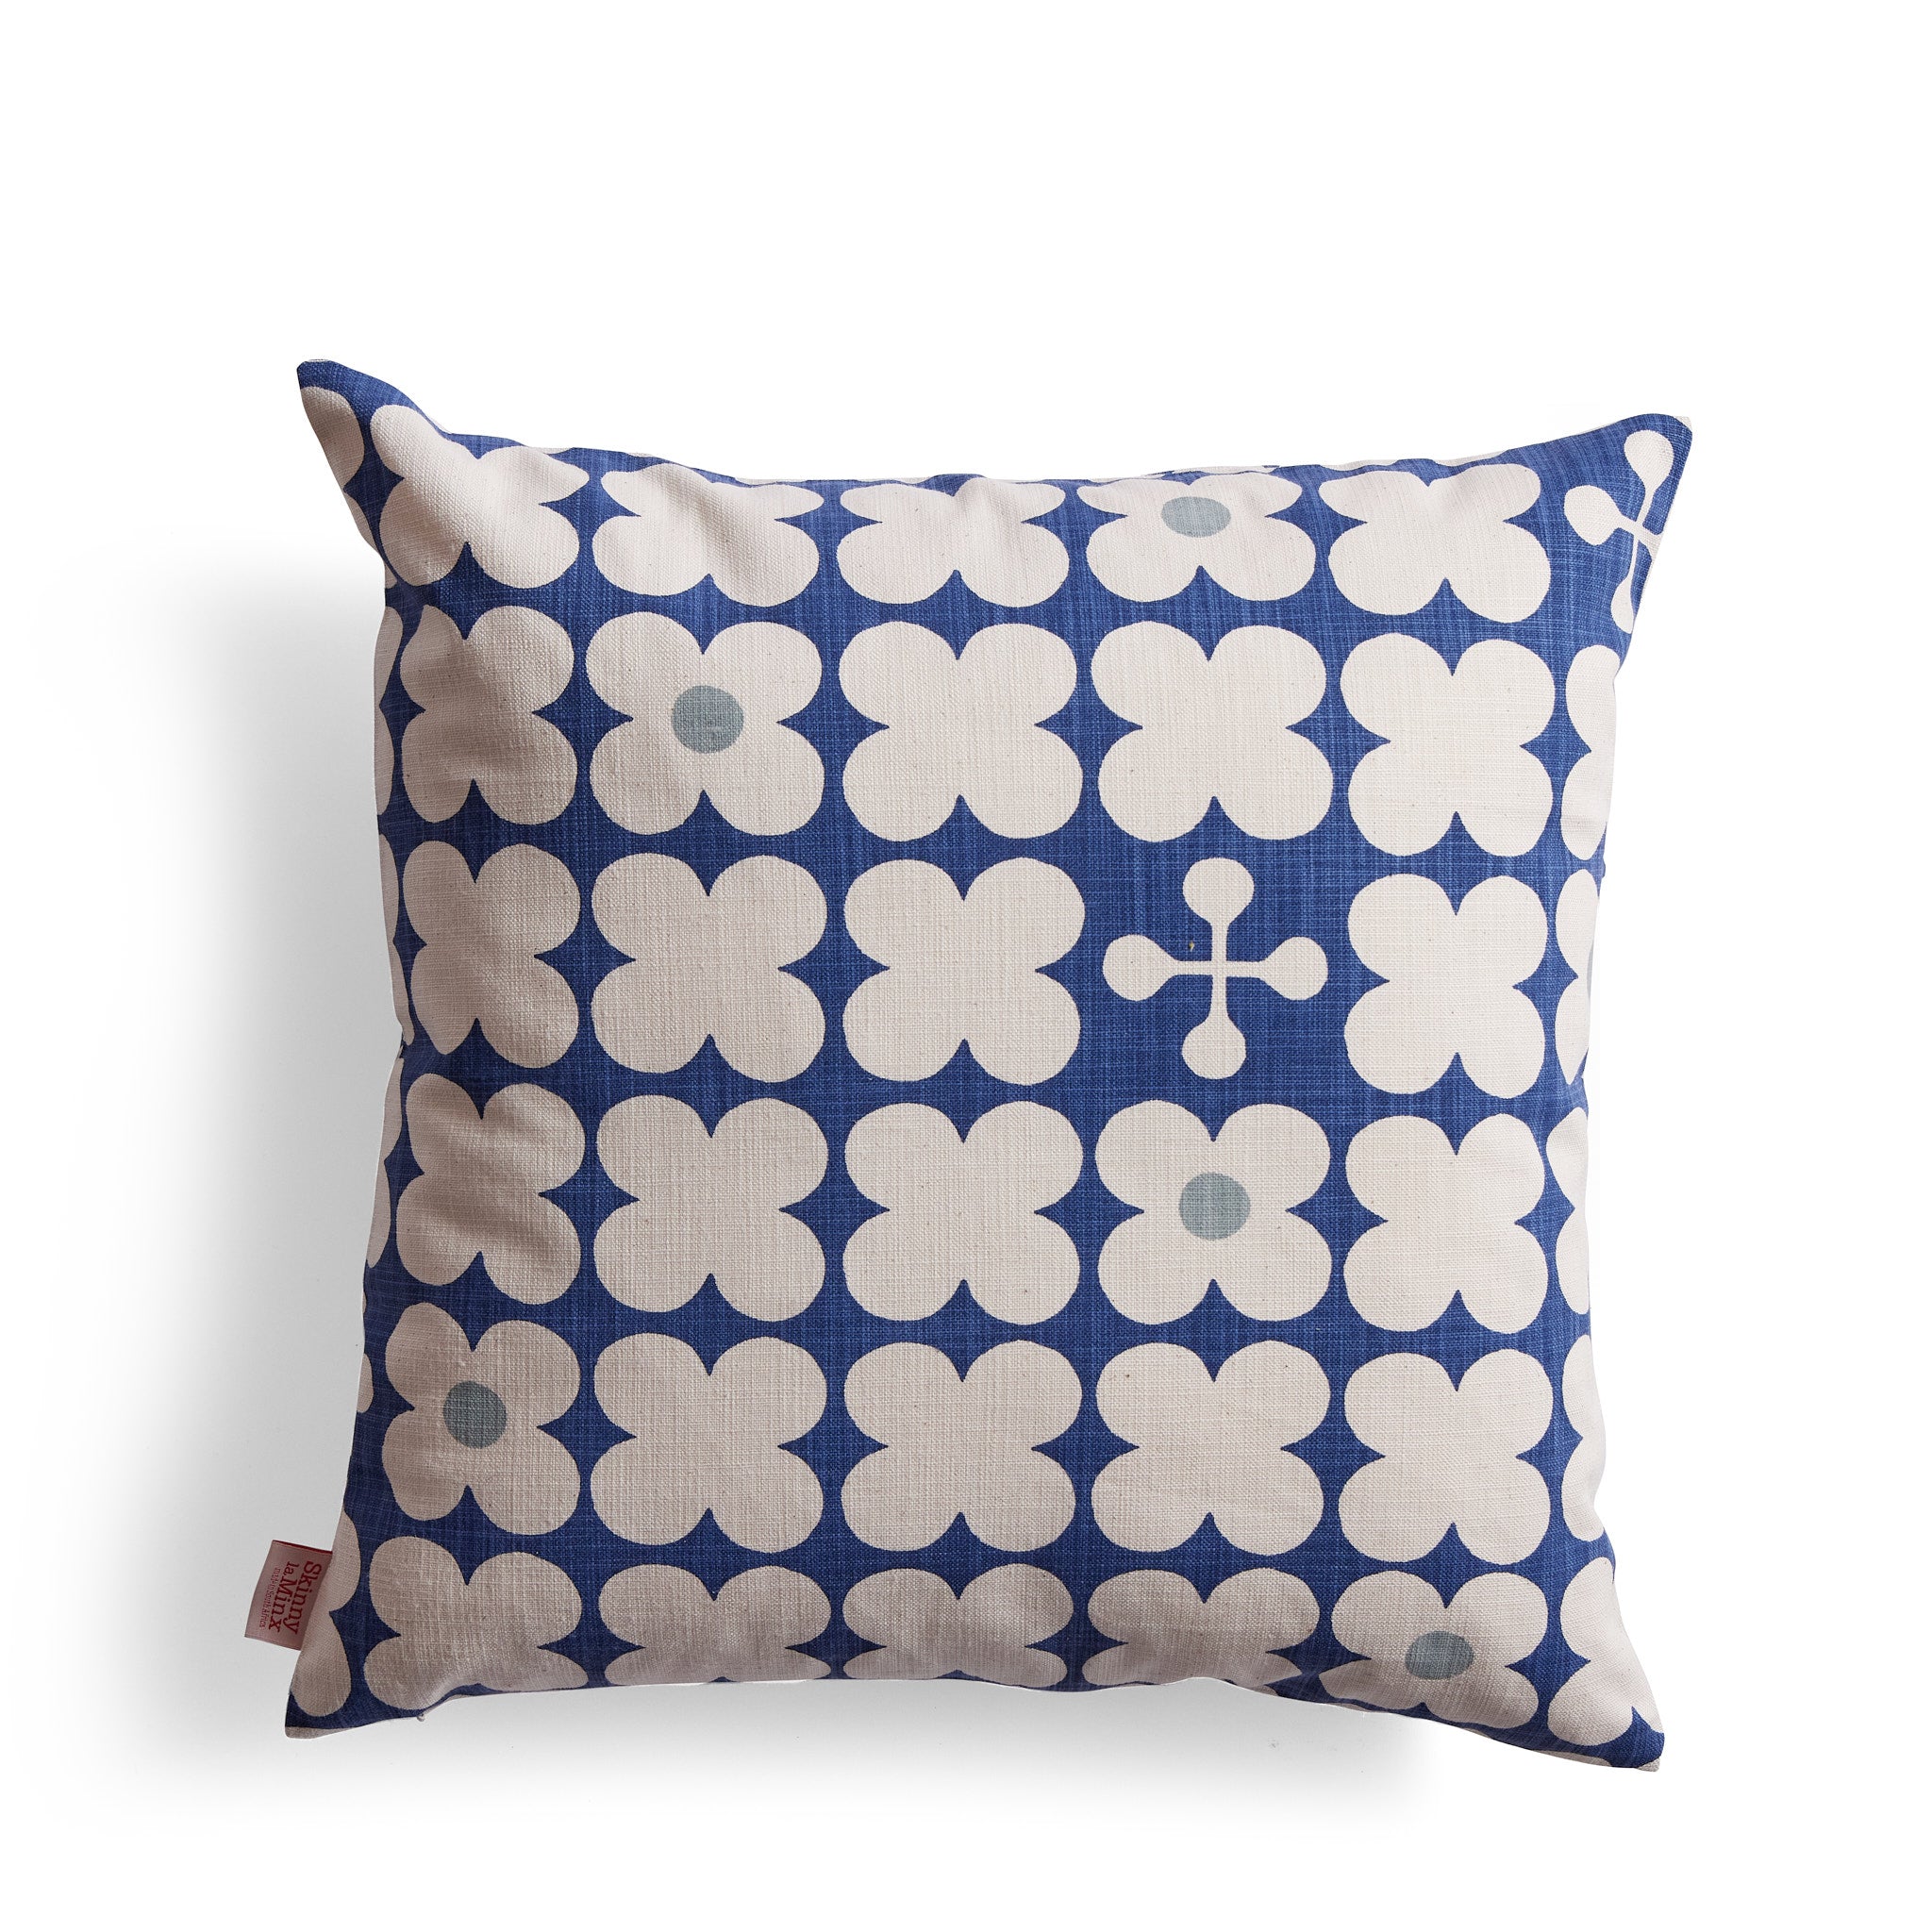 Scandi Candy Cushion in Inky Blue Zoom Image 1